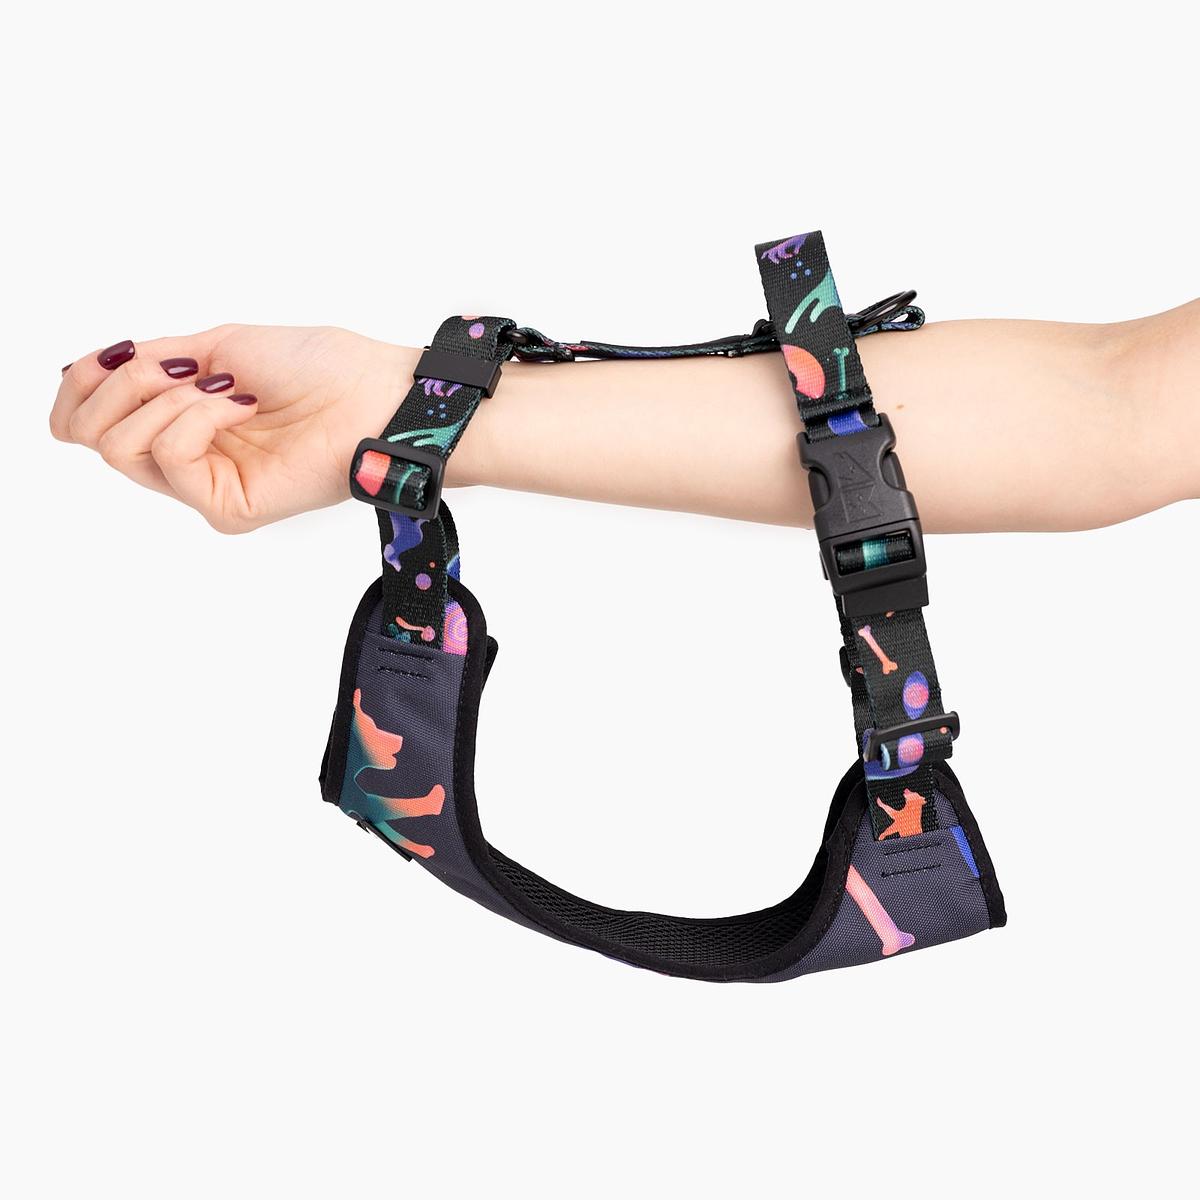 Stay-on pressure-free harness "Psychodelic"